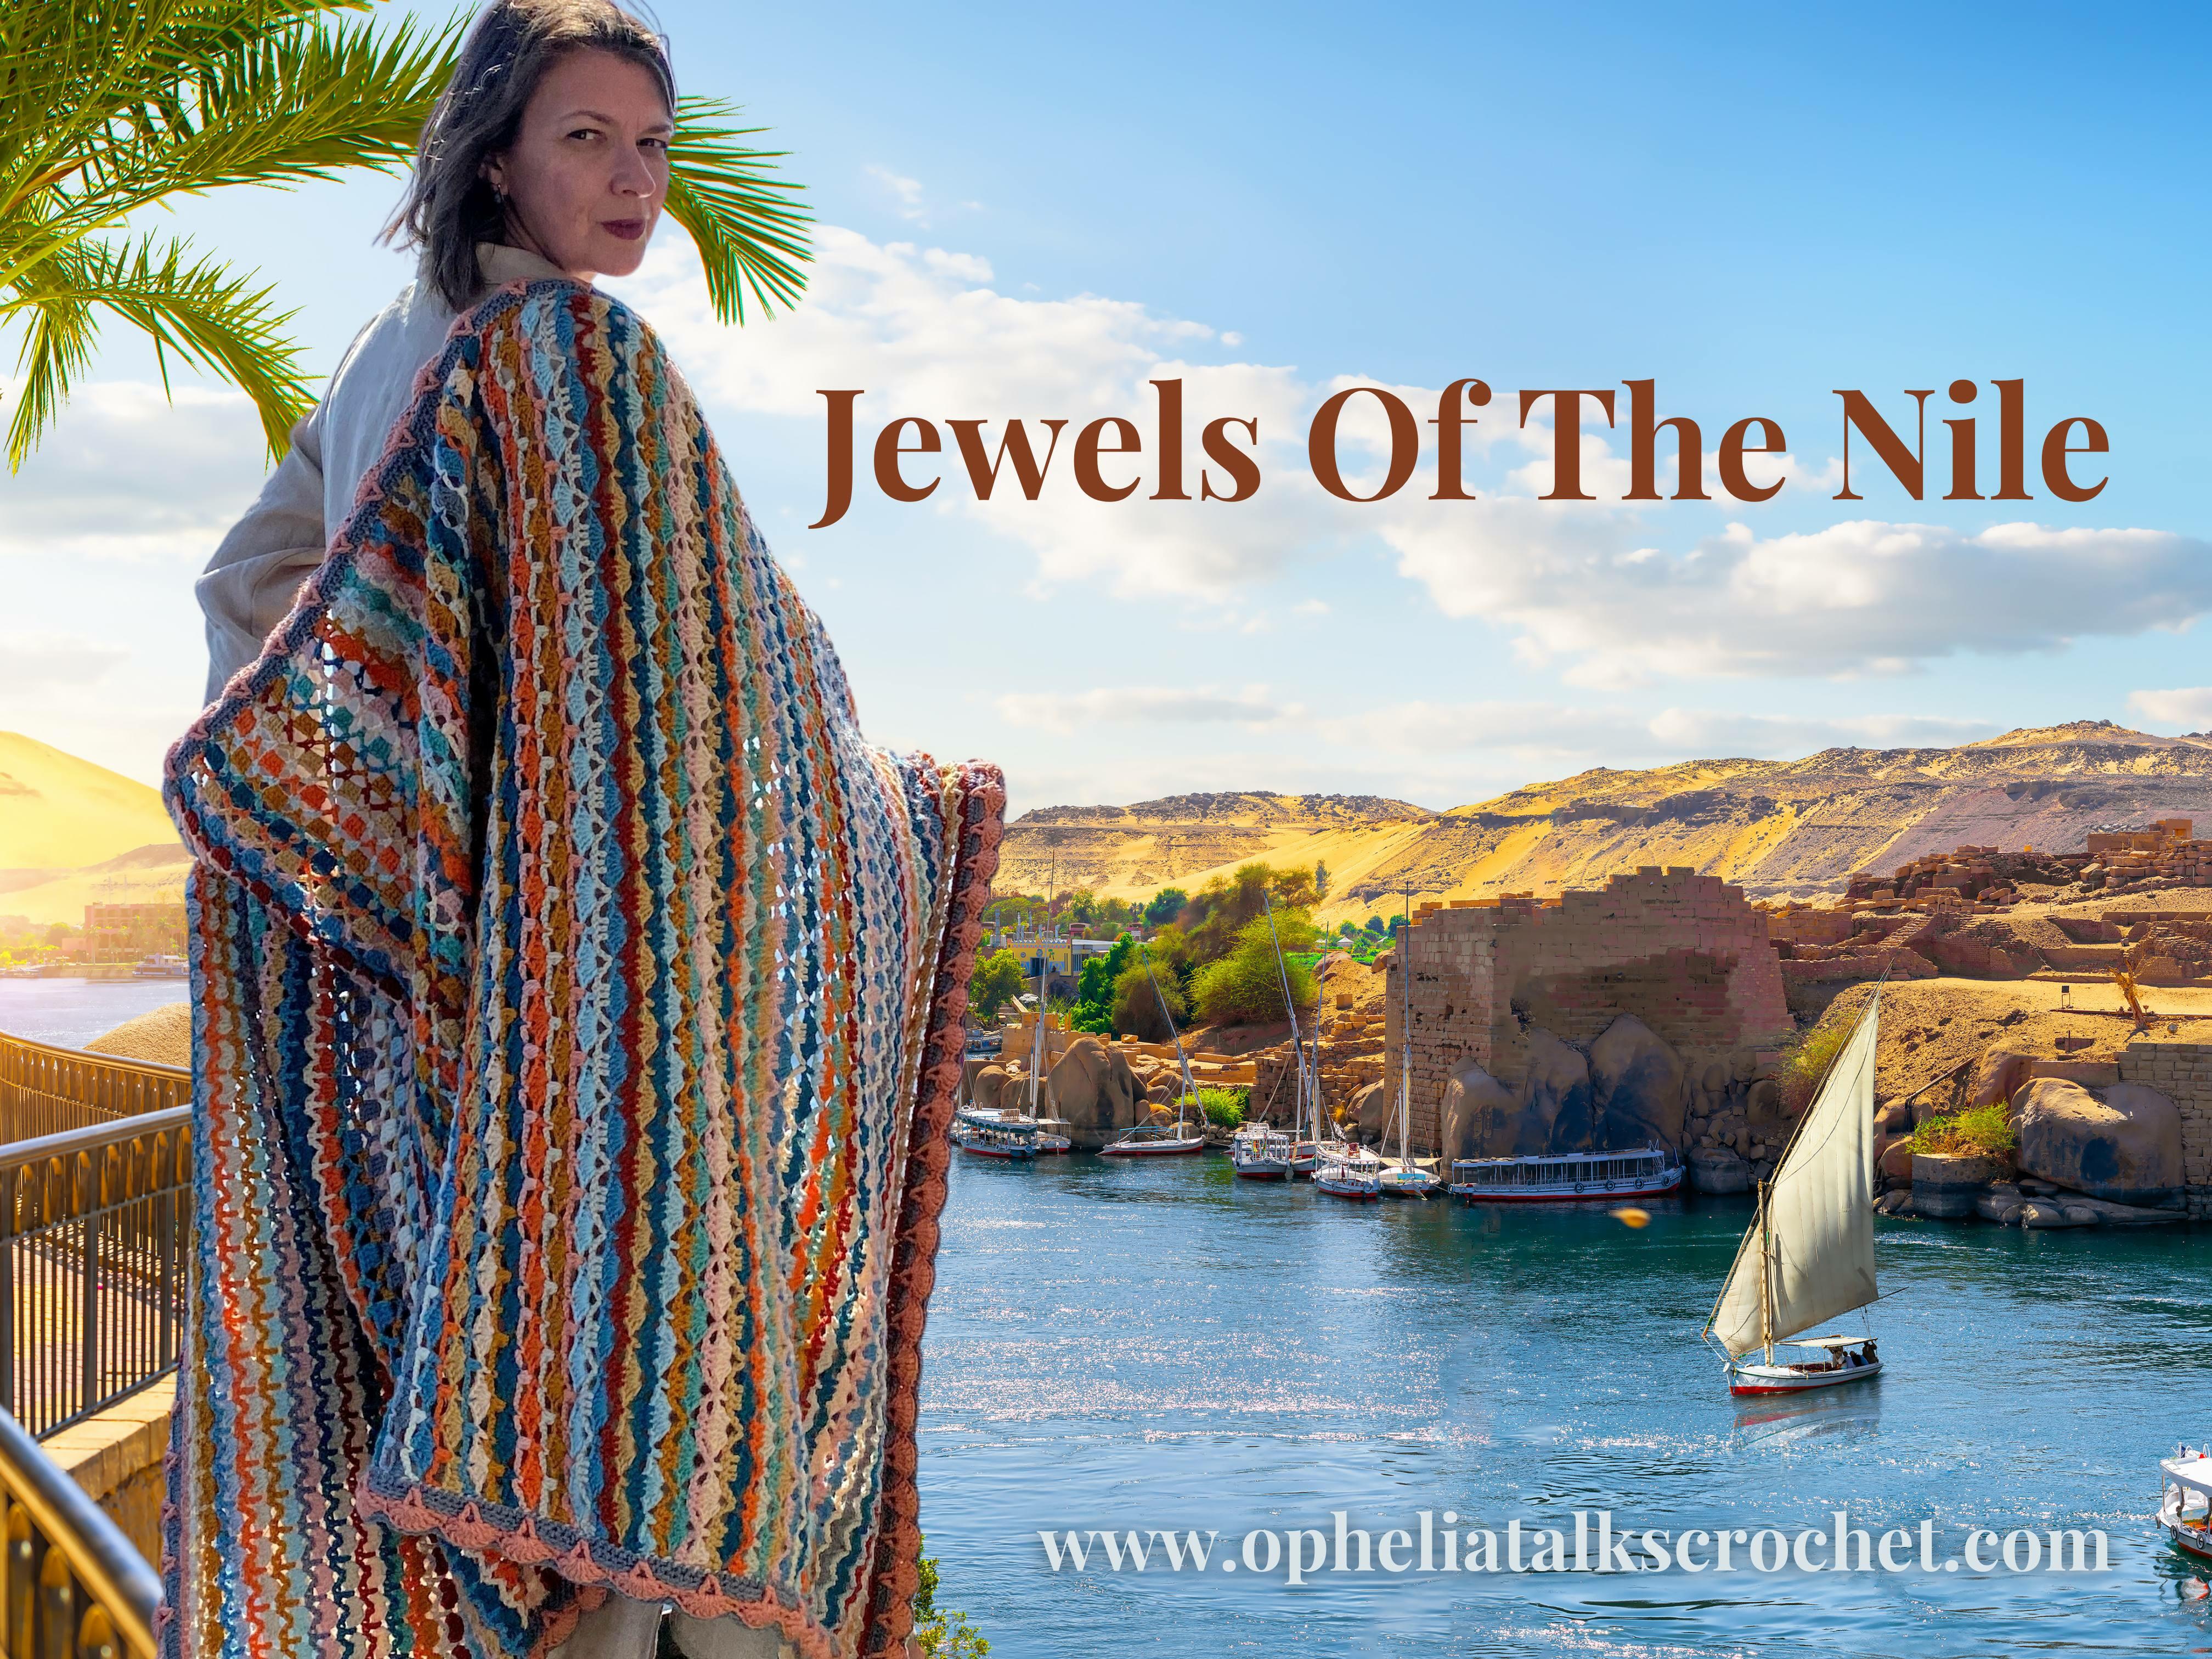 copy-of-jewels-of-the-nile-in-wendy-website-photo.jpg